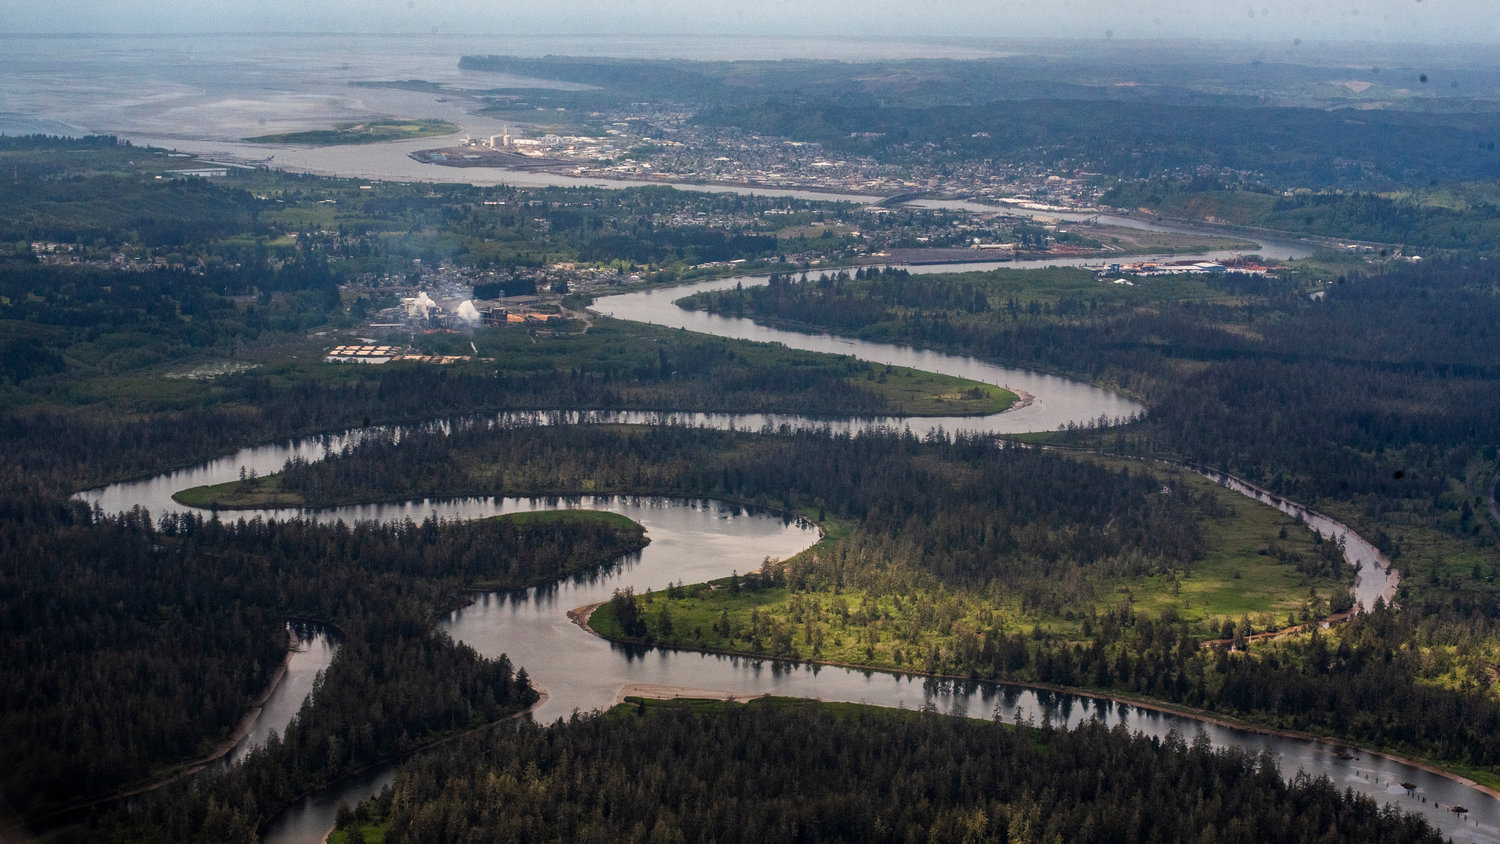 The Chehalis River flows past Cosmopolis and to the harbor.